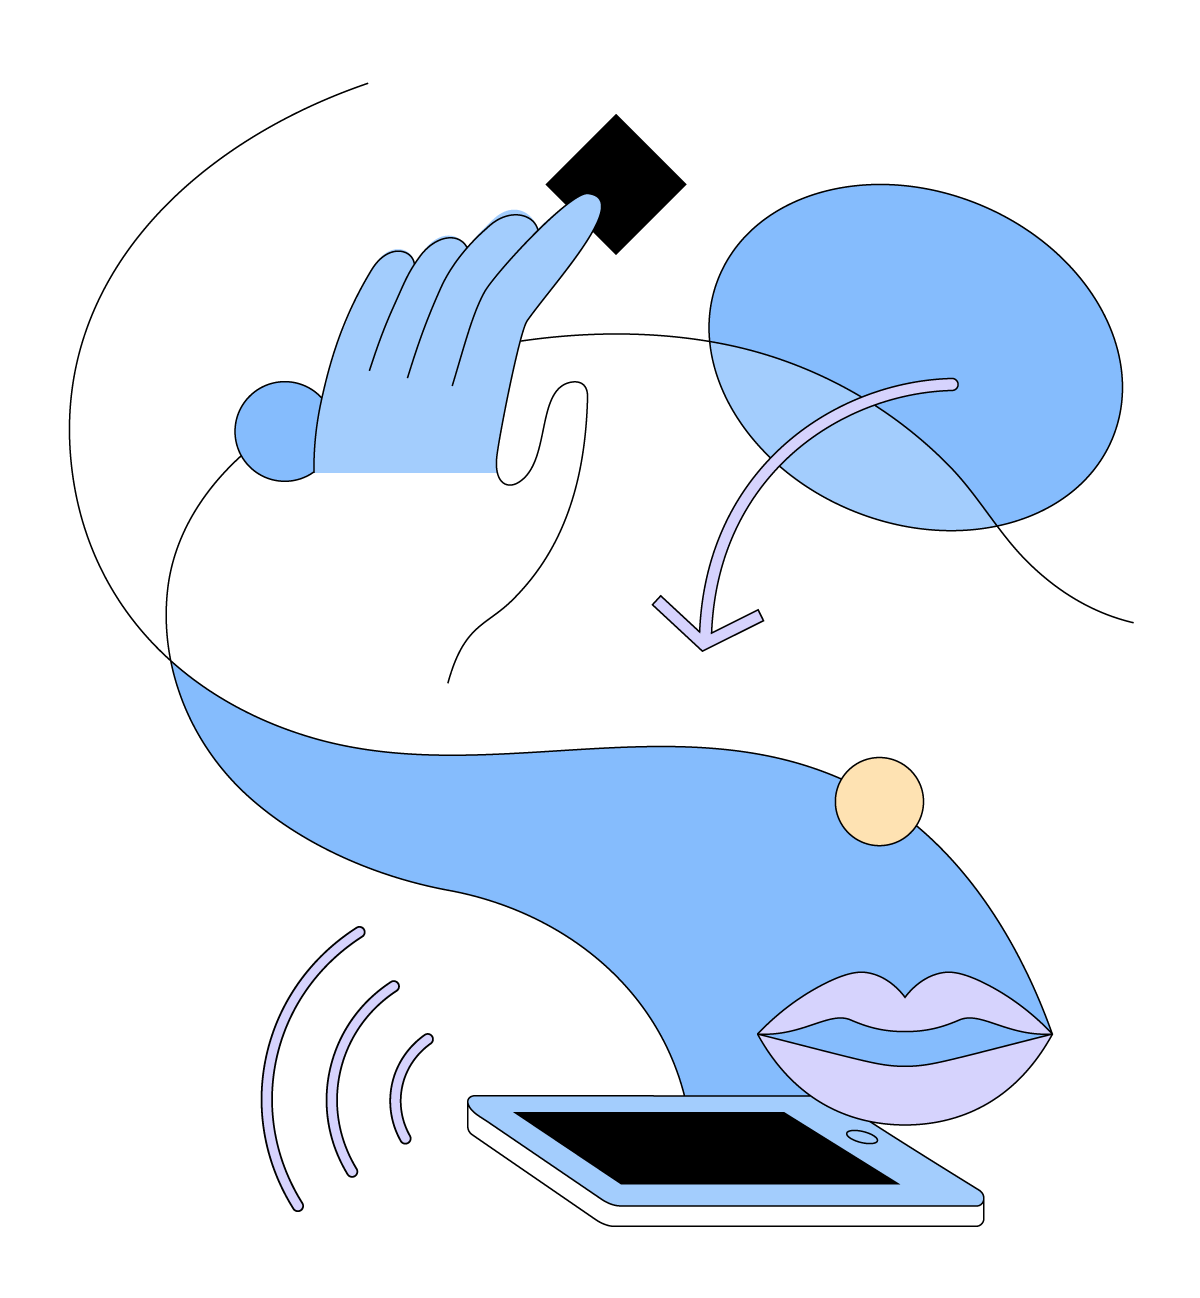 Abstract, cartoon graphic featuring a mobile tablet, lips and a hand.